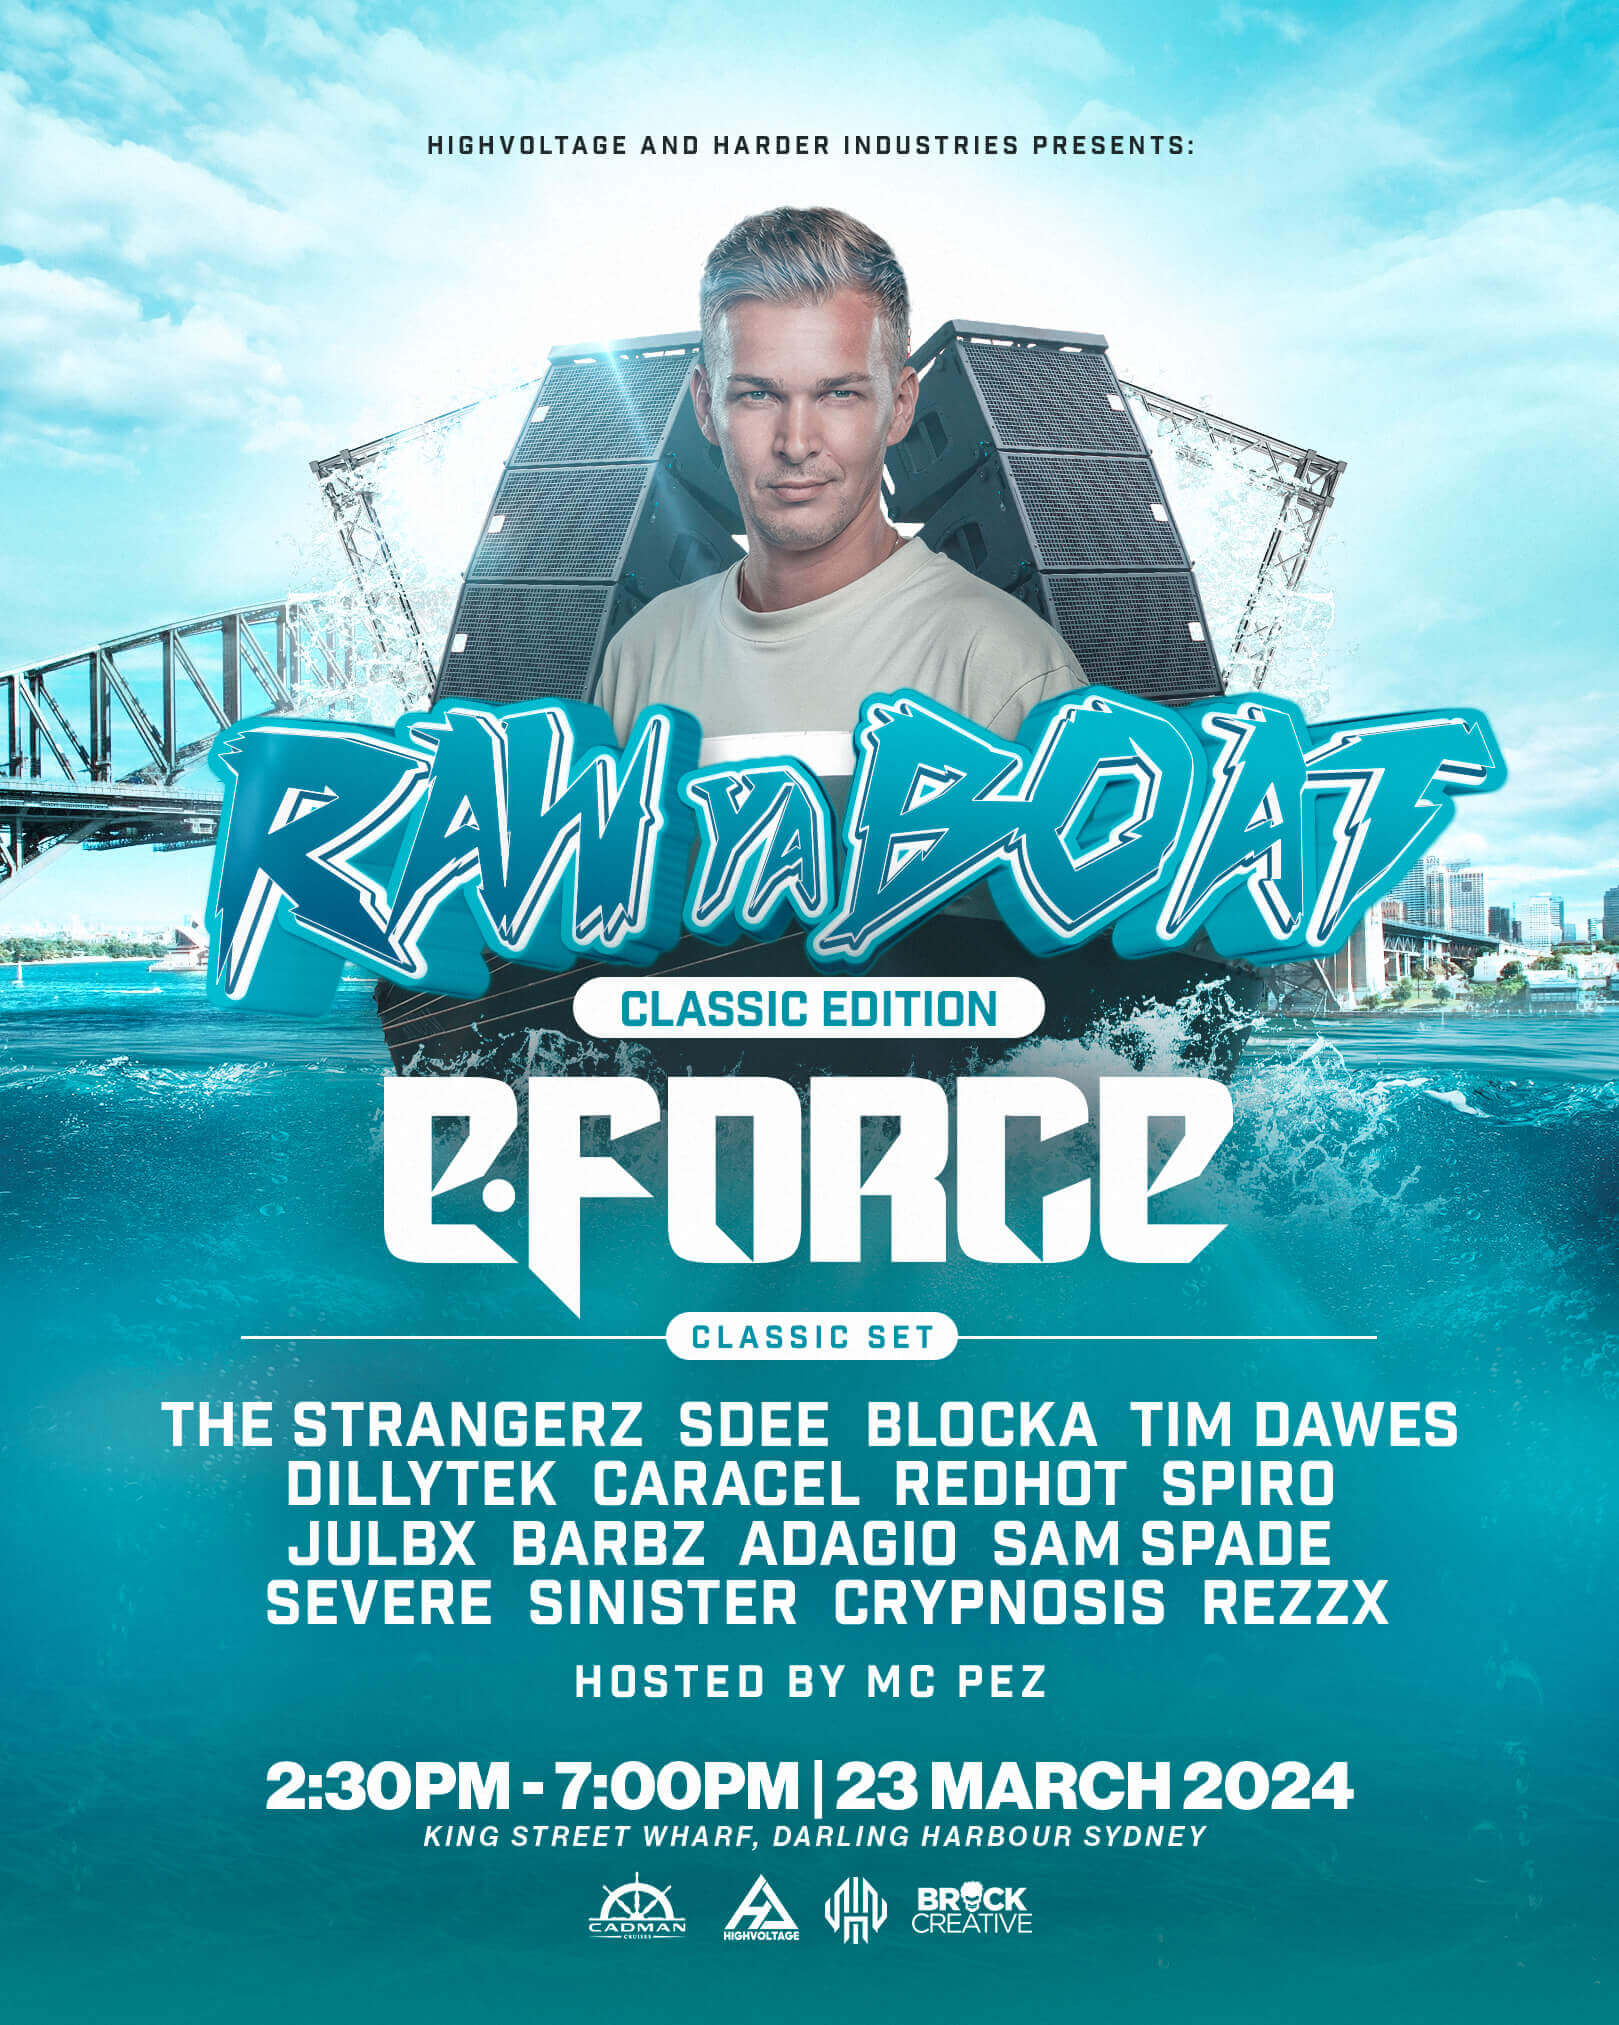 Highvoltage and Harder industries presents RAW ya BOAT The Classic Edition